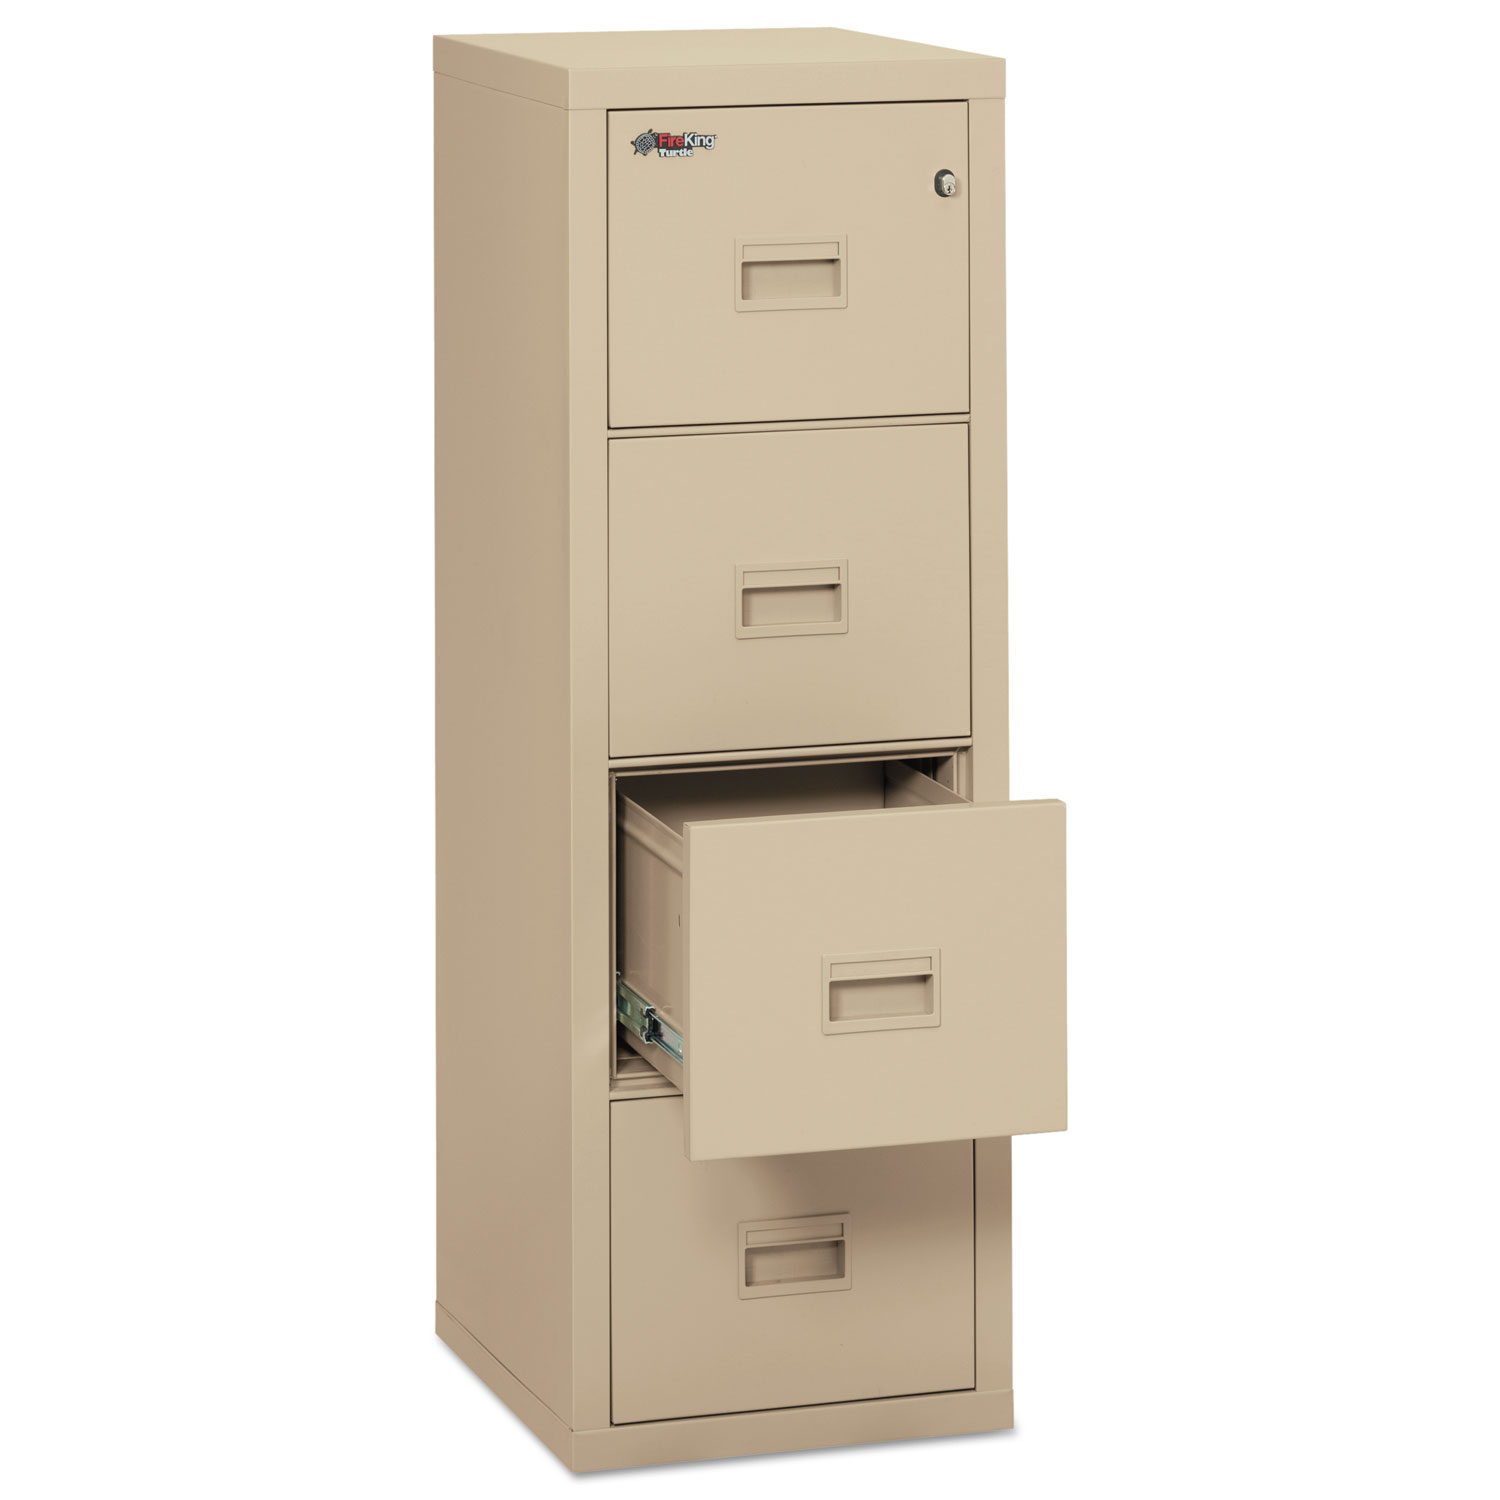  FireKing 4R1822-CPA Turtle Four-Drawer File, 17.75w x 22.13d x 52.75h, UL Listed 350° for Fire, Parchment (FIR4R1822CPA) 